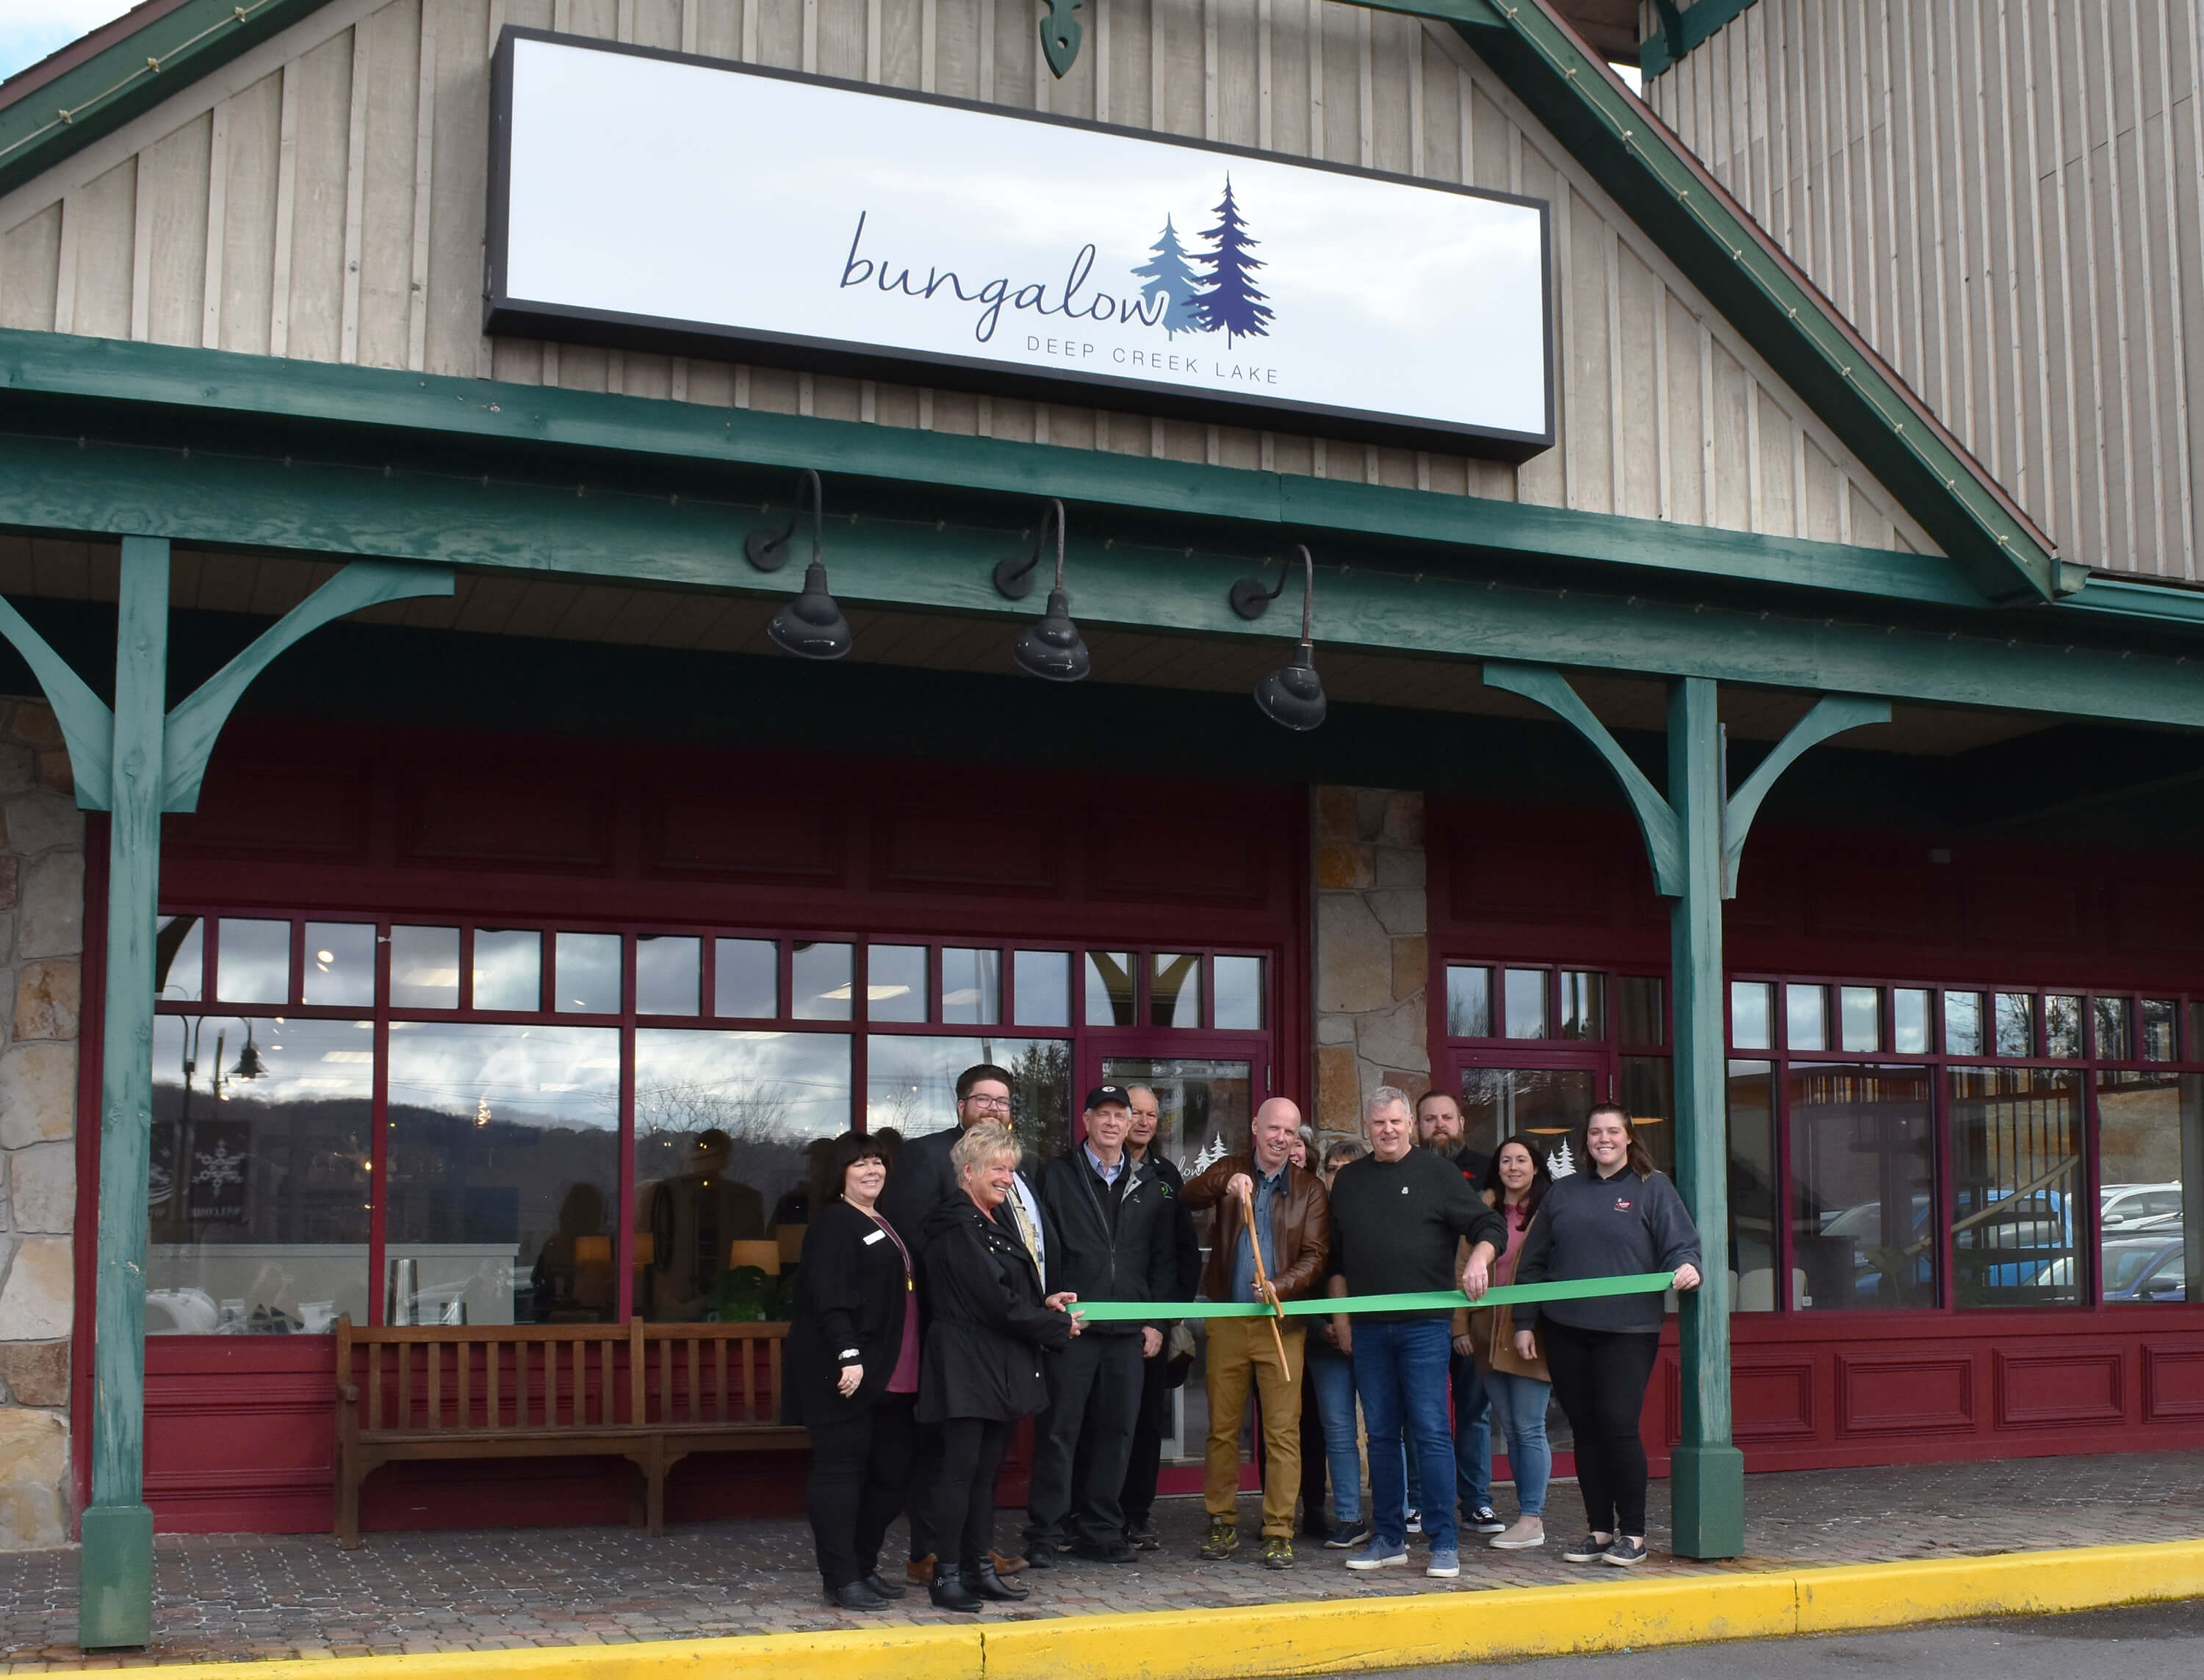 On Friday, February 9, the Garrett County Chamber of Commerce partnered with the Garrett County Department of Business Development to hold the first ribbon cutting ceremony of 2024 for the grand opening of Bungalow Deep Creek Lake in McHenry.